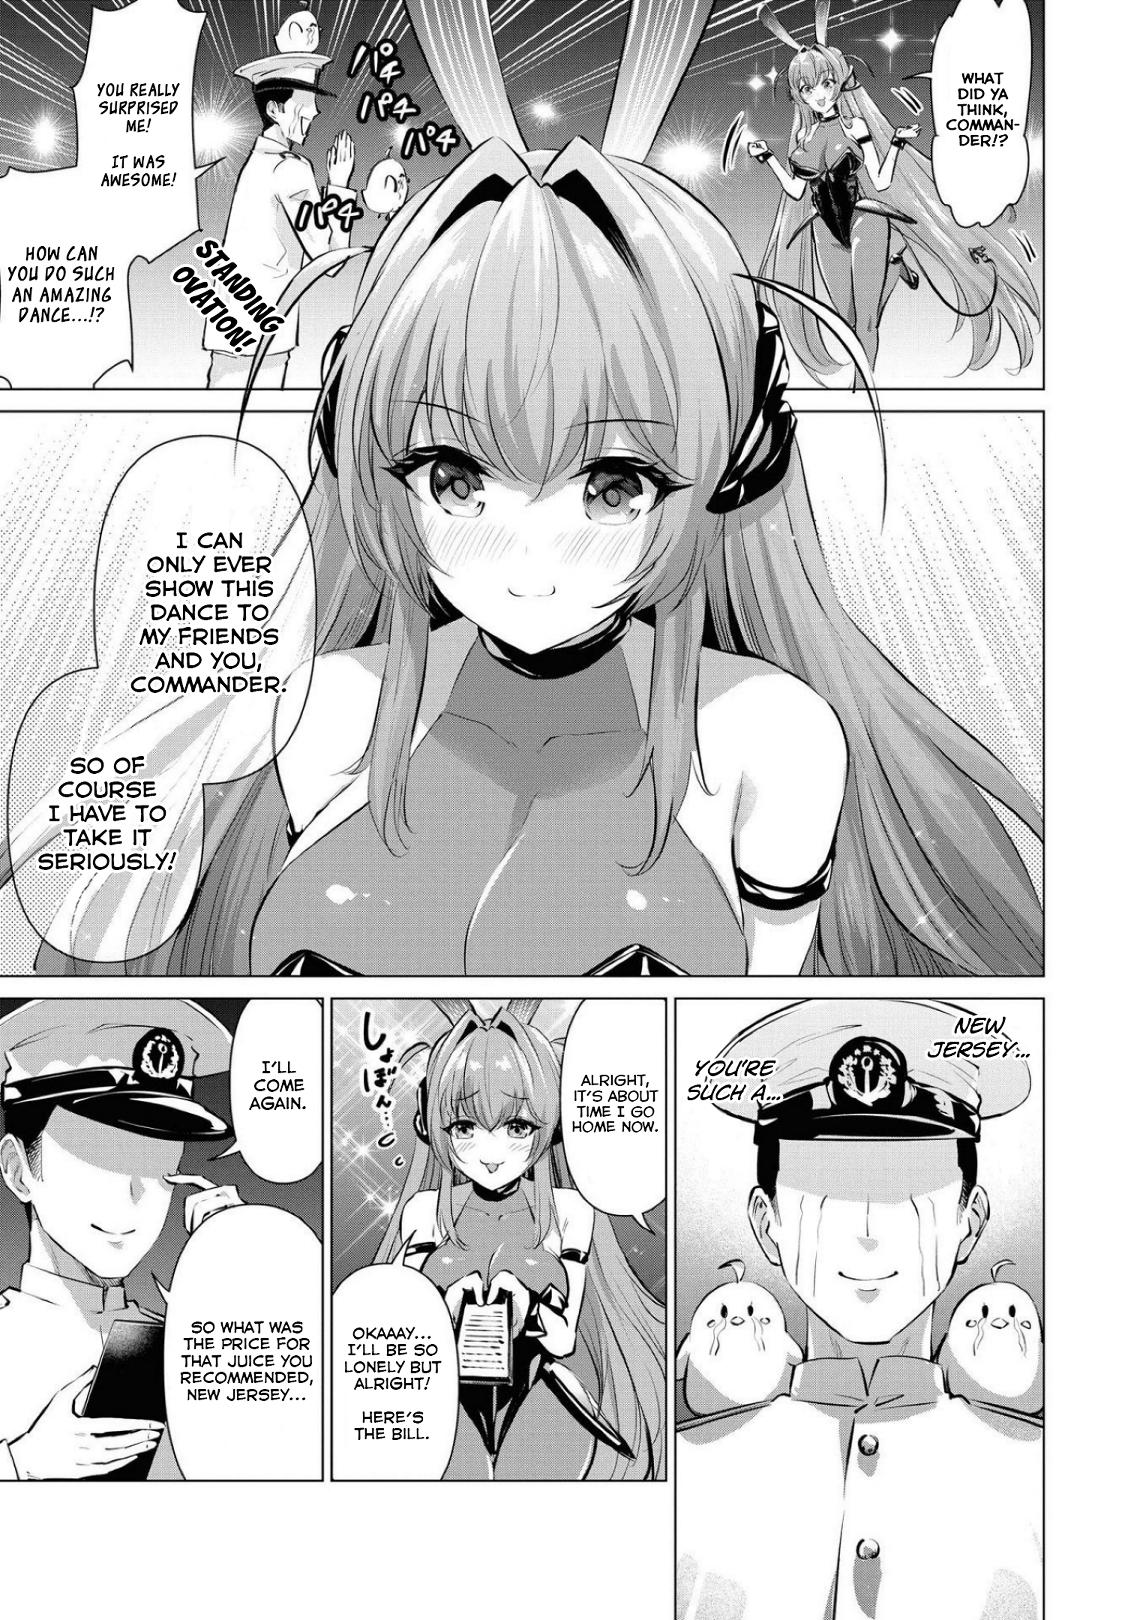 Azur Lane Comic Anthology Breaking!! Vol.5 Chapter 56: New Jersey's Over-The-Top Hospitality page 13 - Mangakakalot